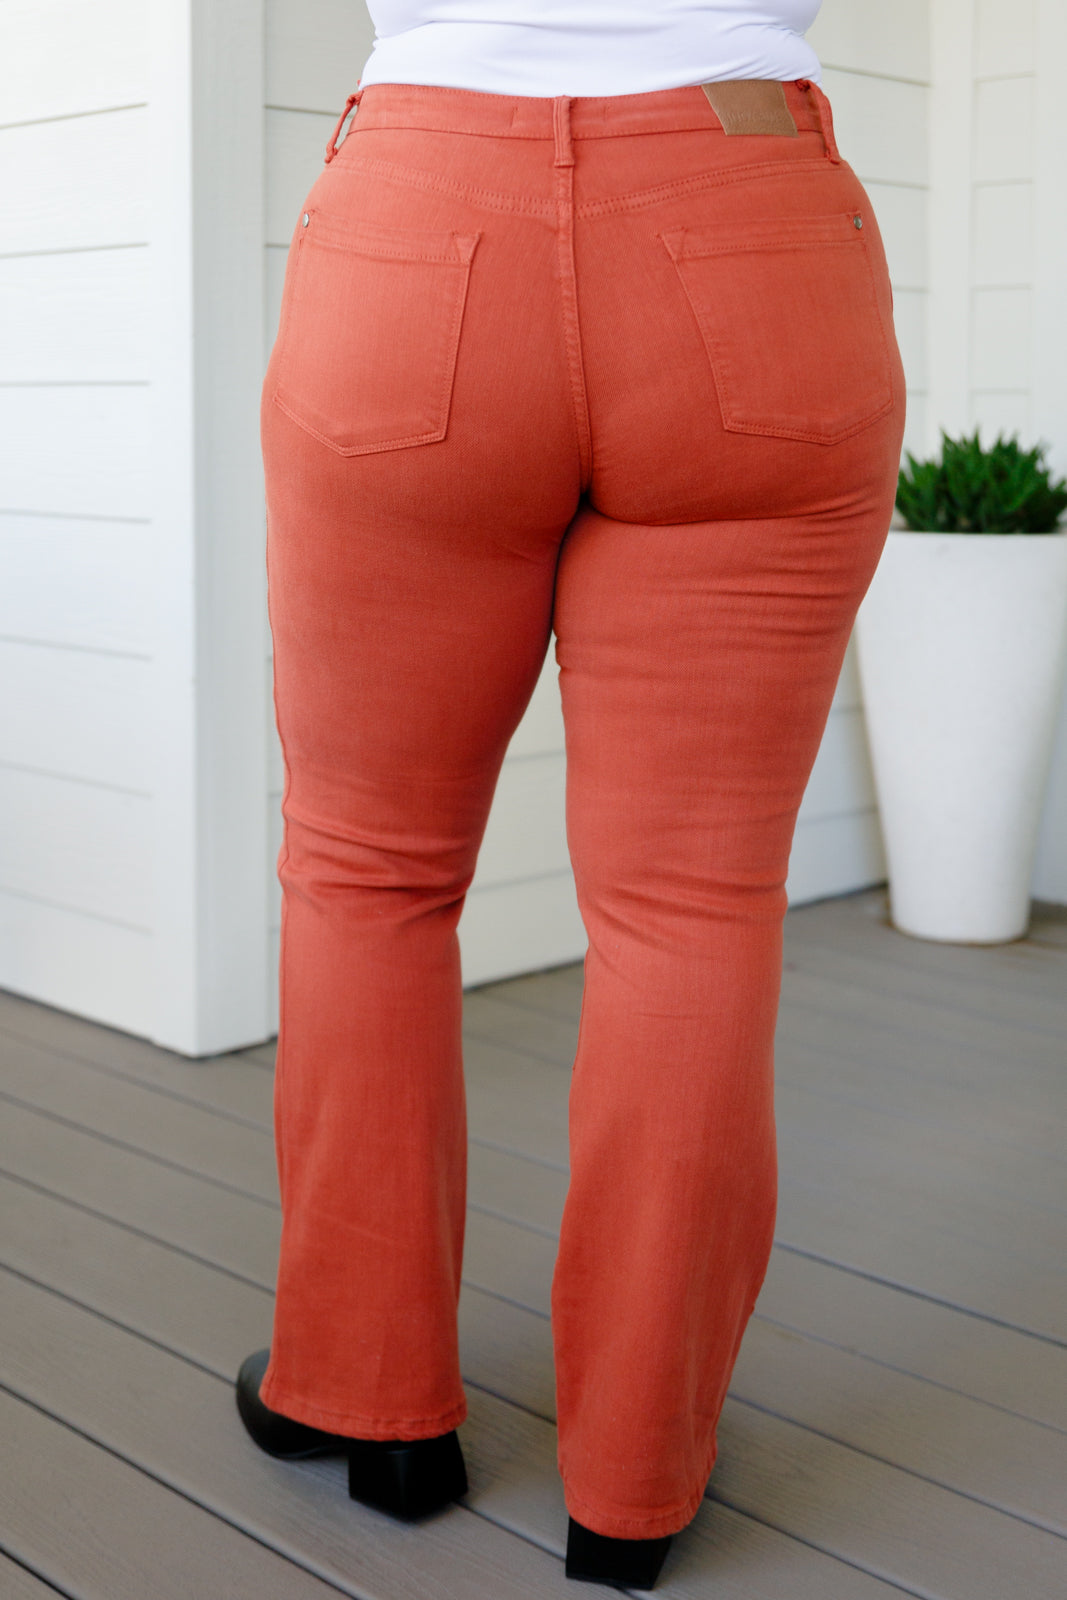 Mid Rise Slim Bootcut Judy Blue Jeans in Terracotta